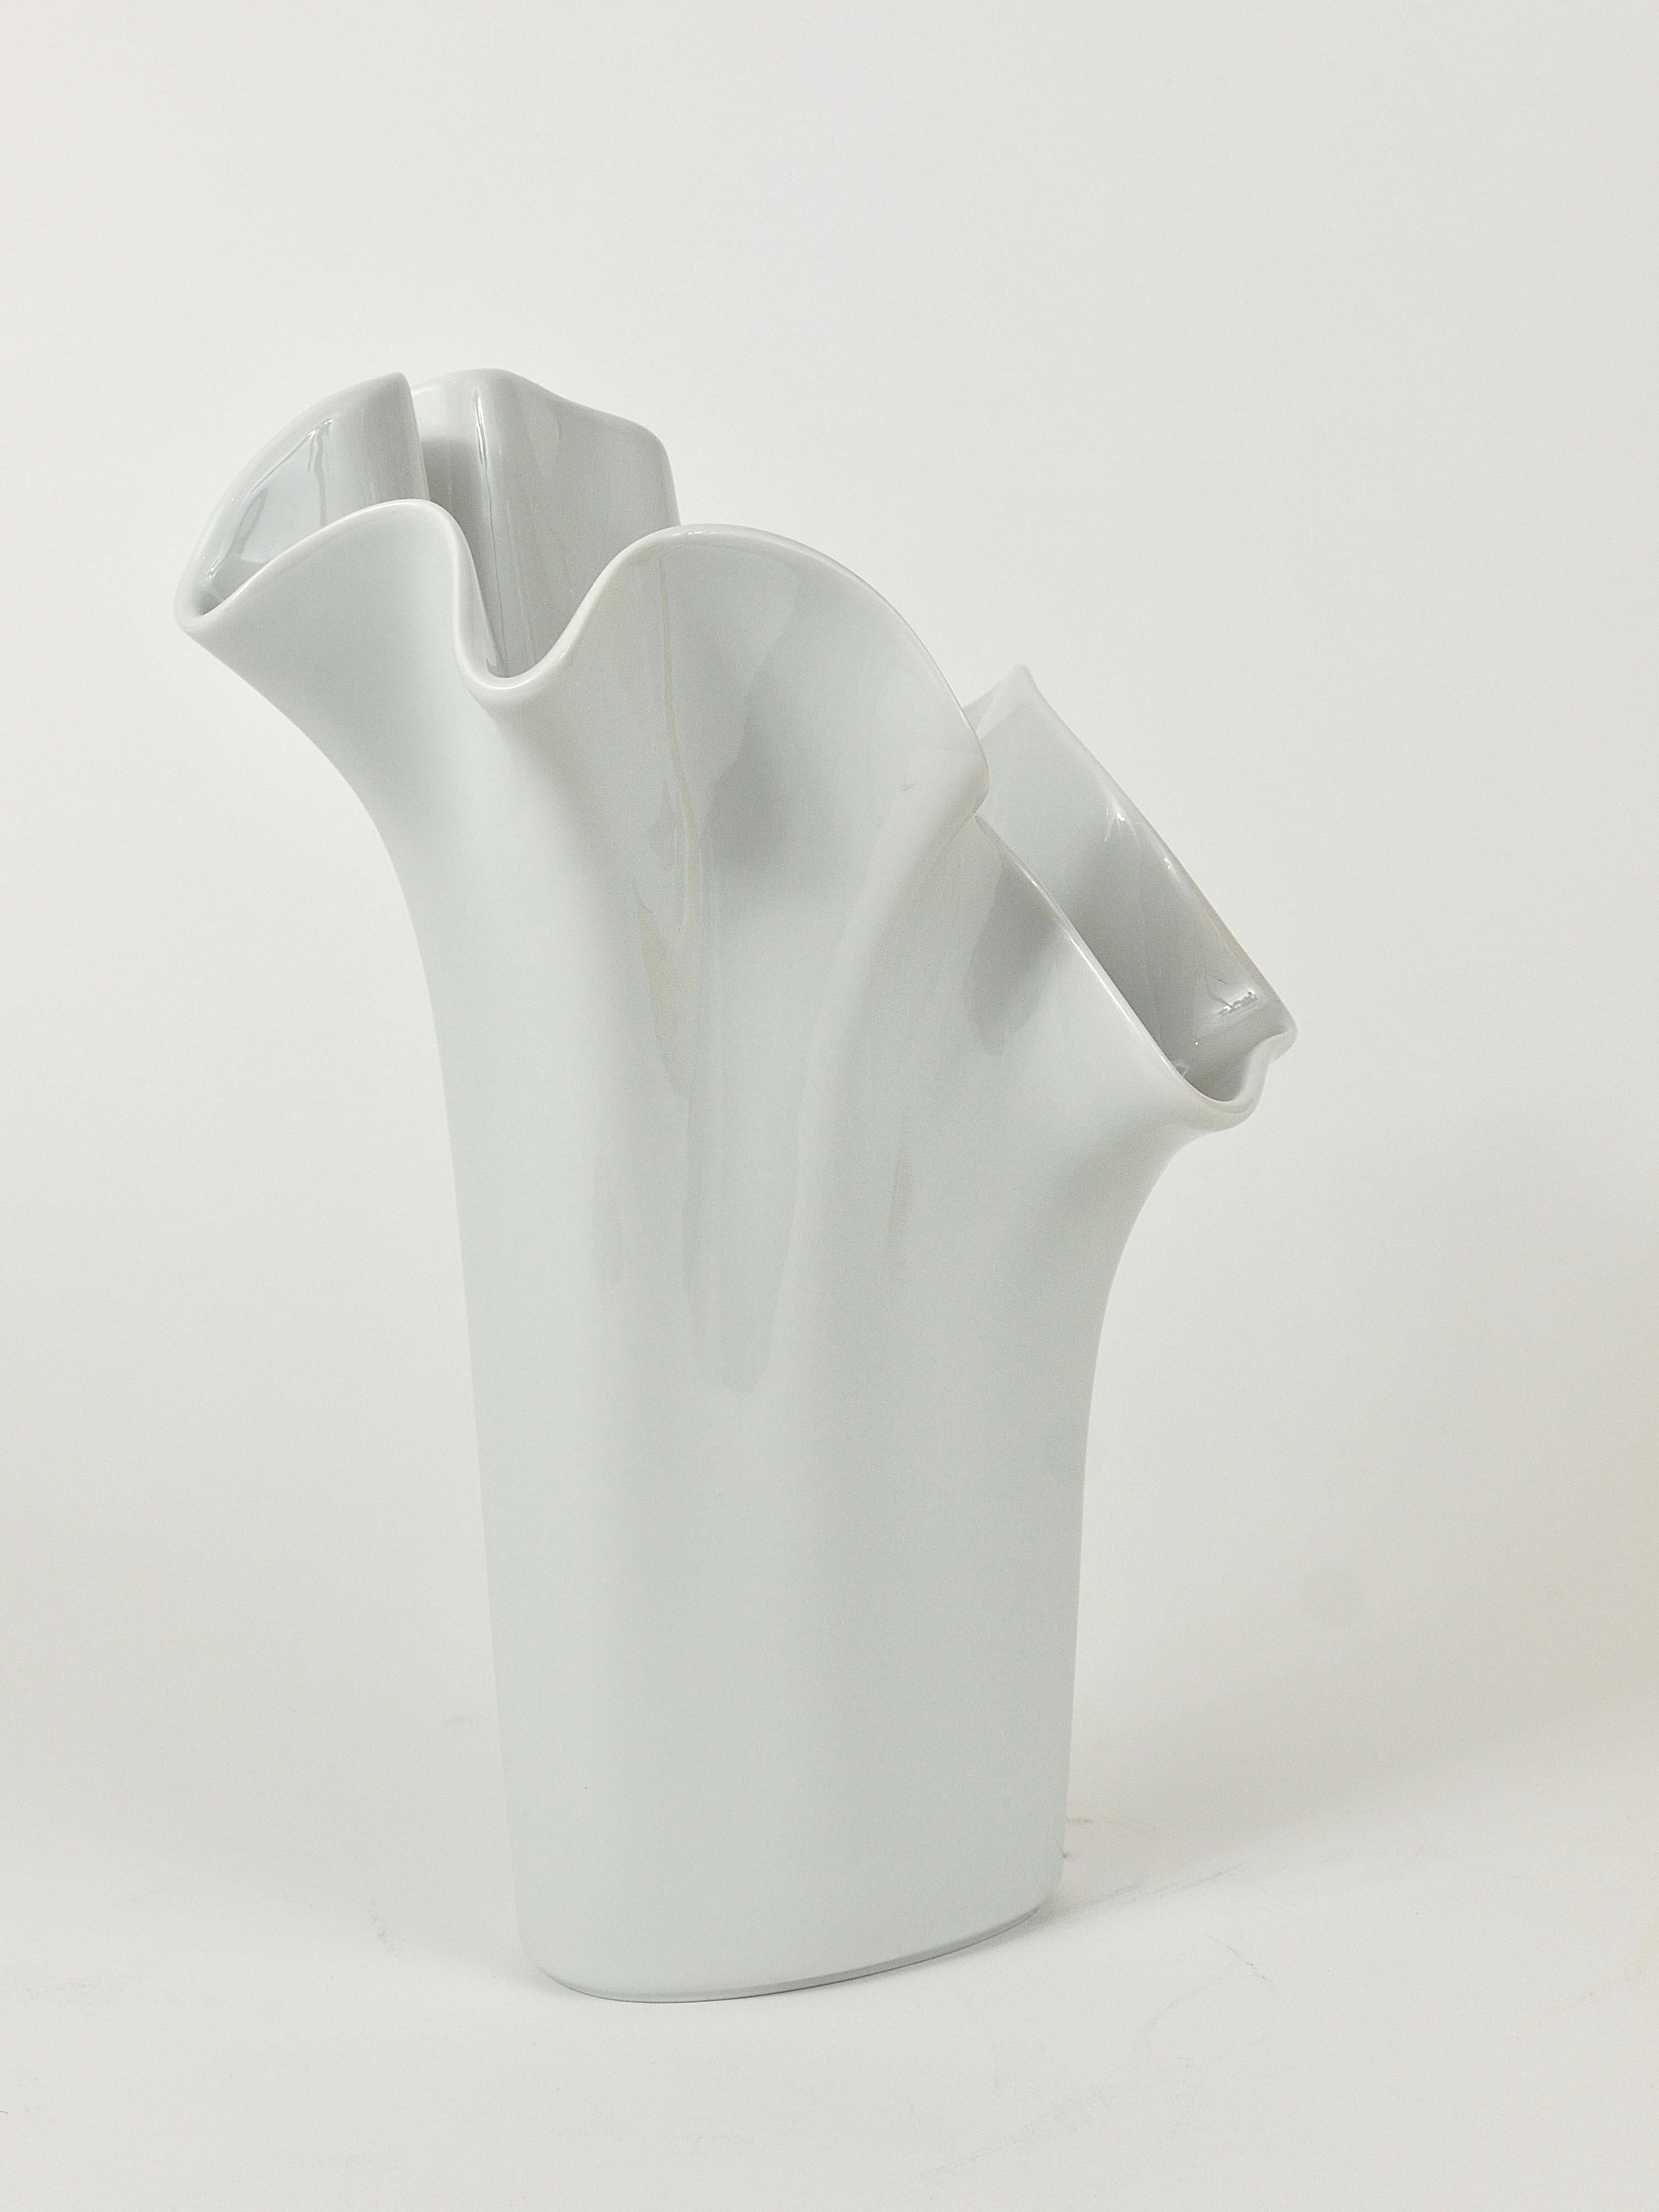 Porcelain Rosenthal Studio-line Fazzoletto Asym Vase by Claus Josef Riedel, Germany, 1970s